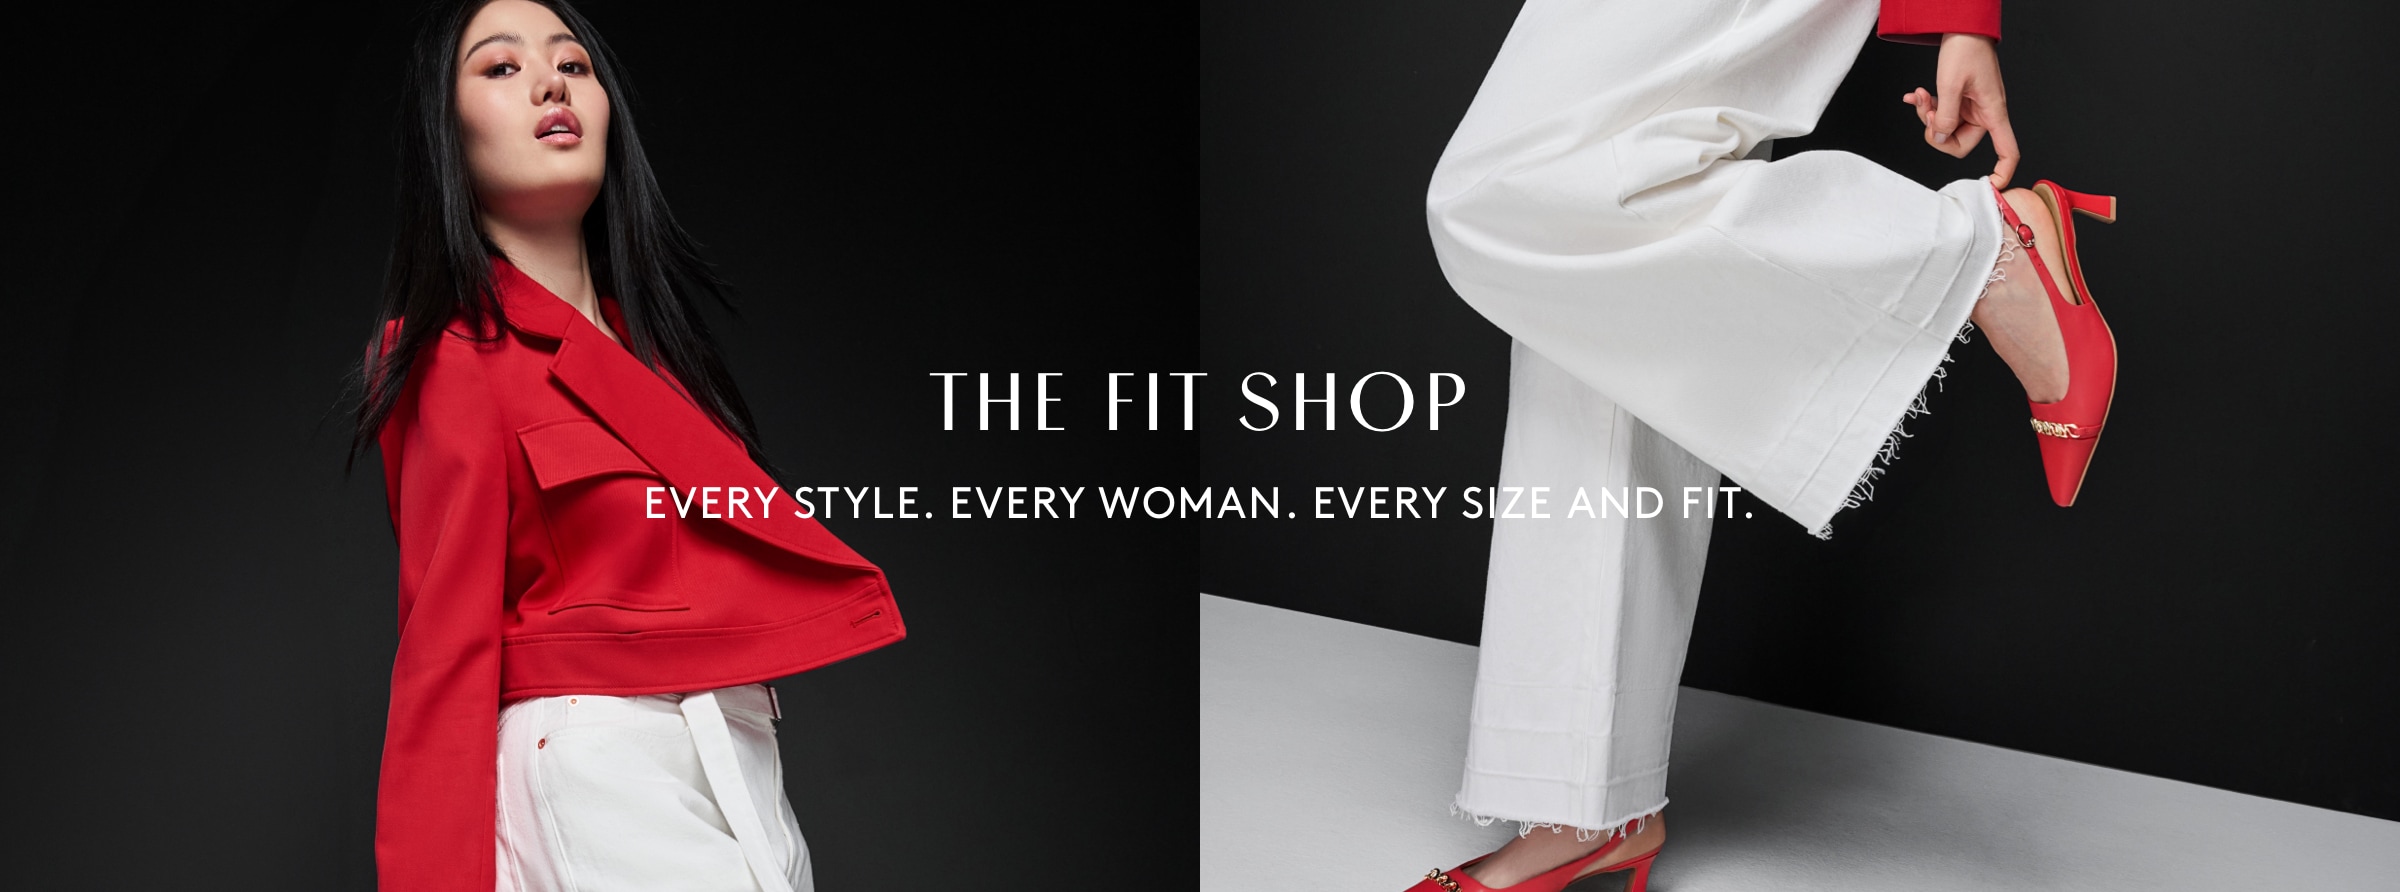 The Fit Shop. Every style, every woman, every size and fit